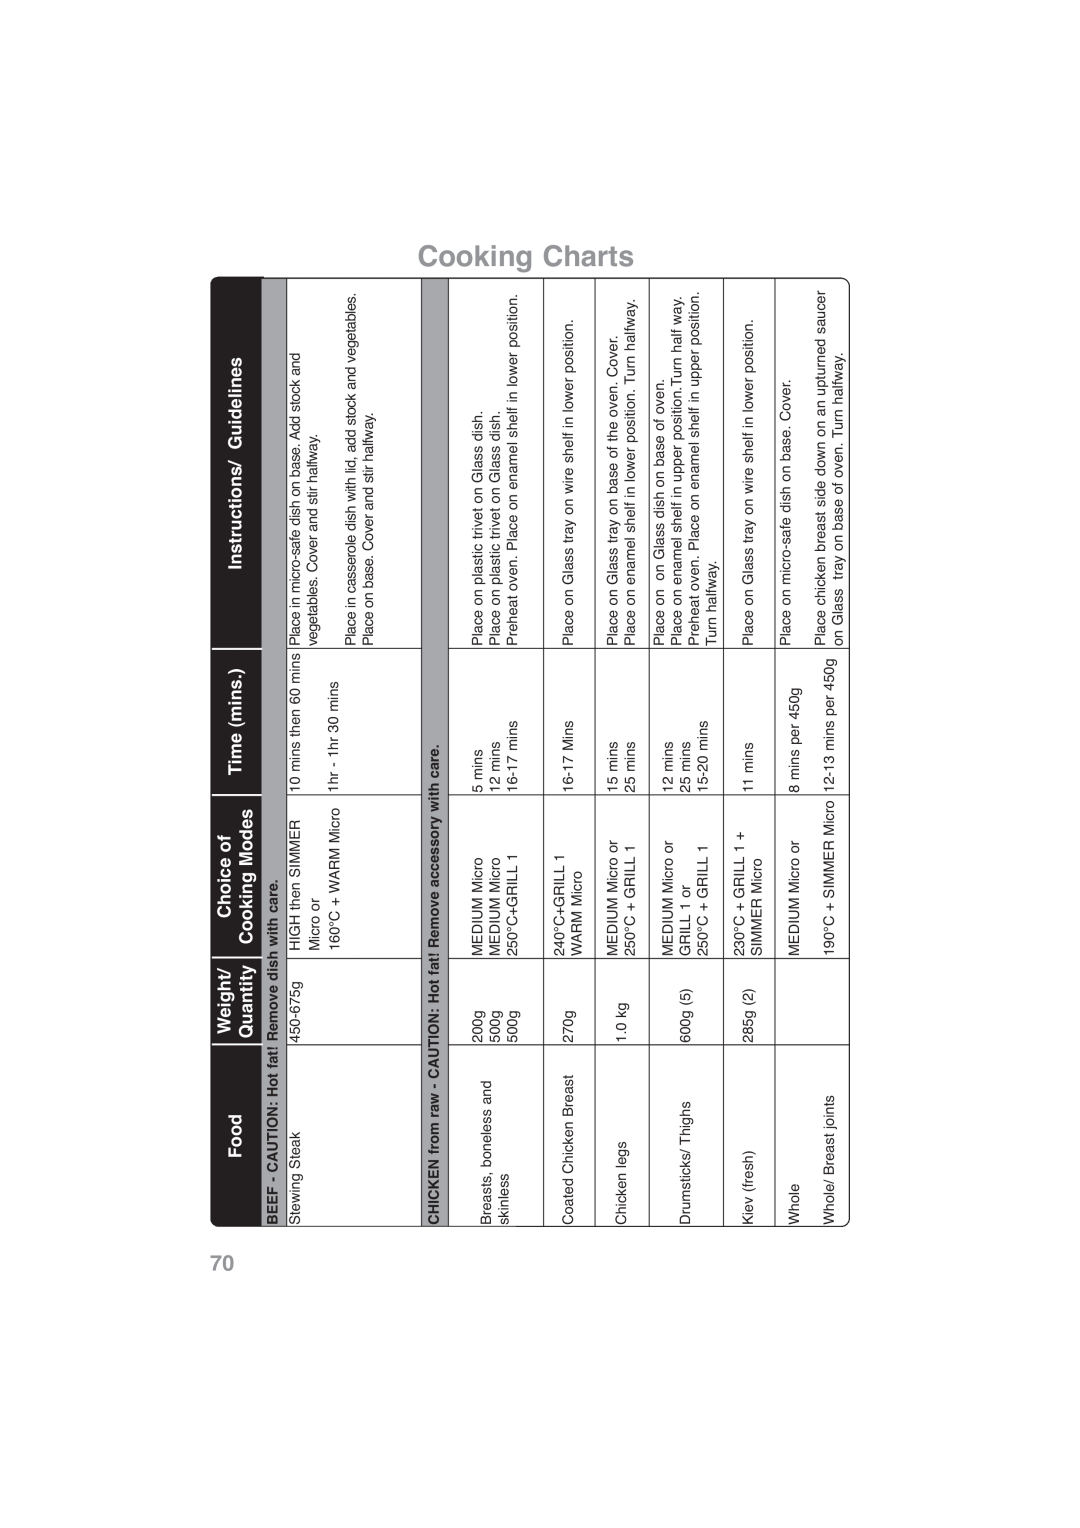 Panasonic NN-CF768M Cooking Charts, Food, Weight, Choice of, Time mins, Instructions/ Guidelines, Quantity, Cooking Modes 